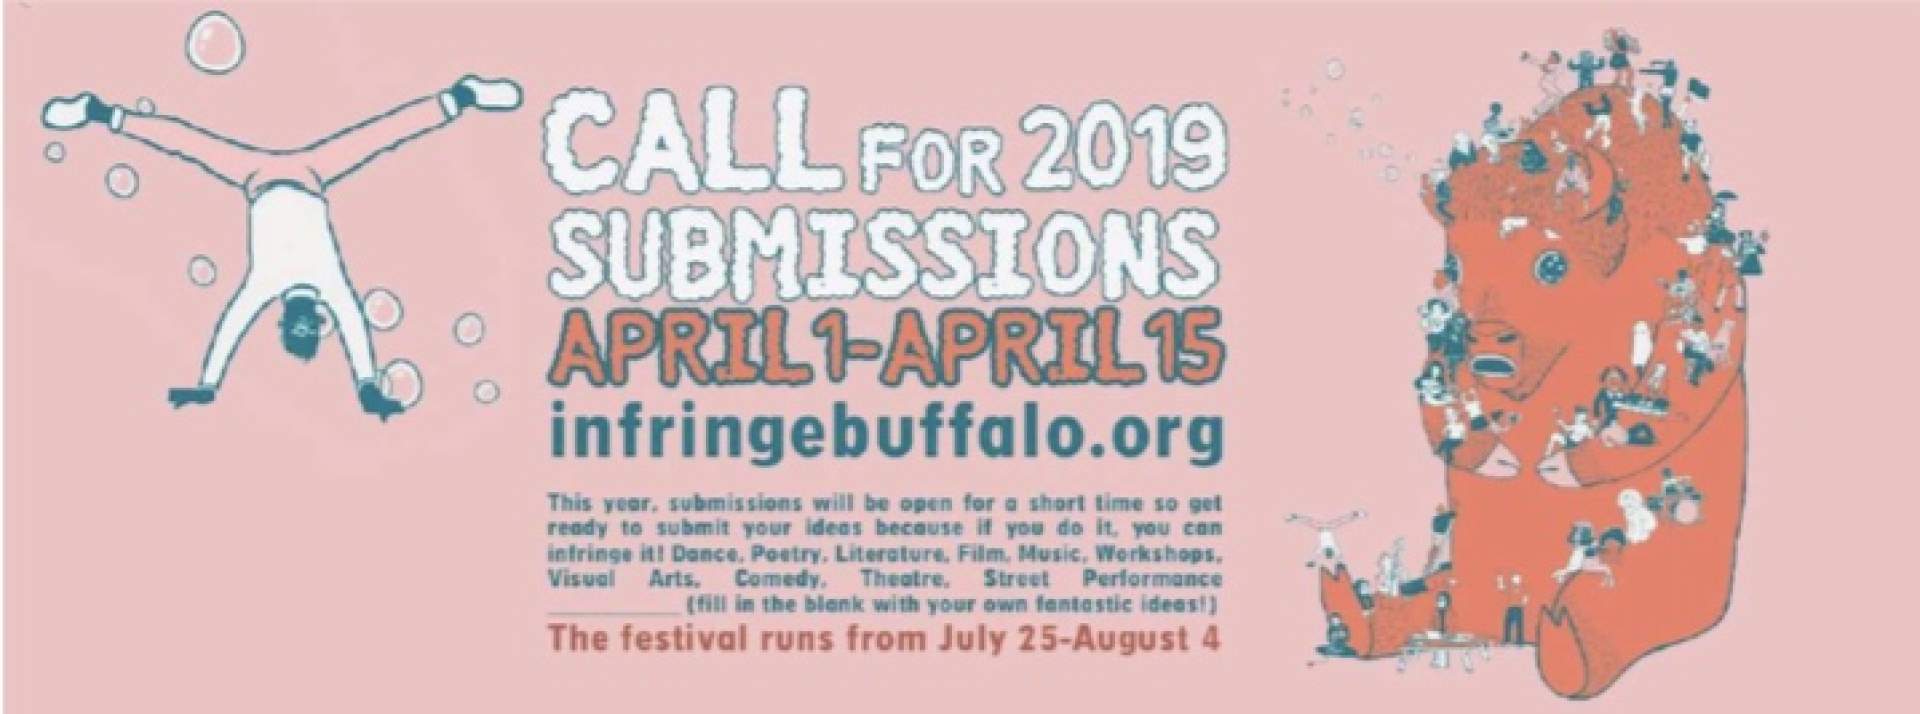 Buffalo Infringement Festival: Call for 2019 Submissions